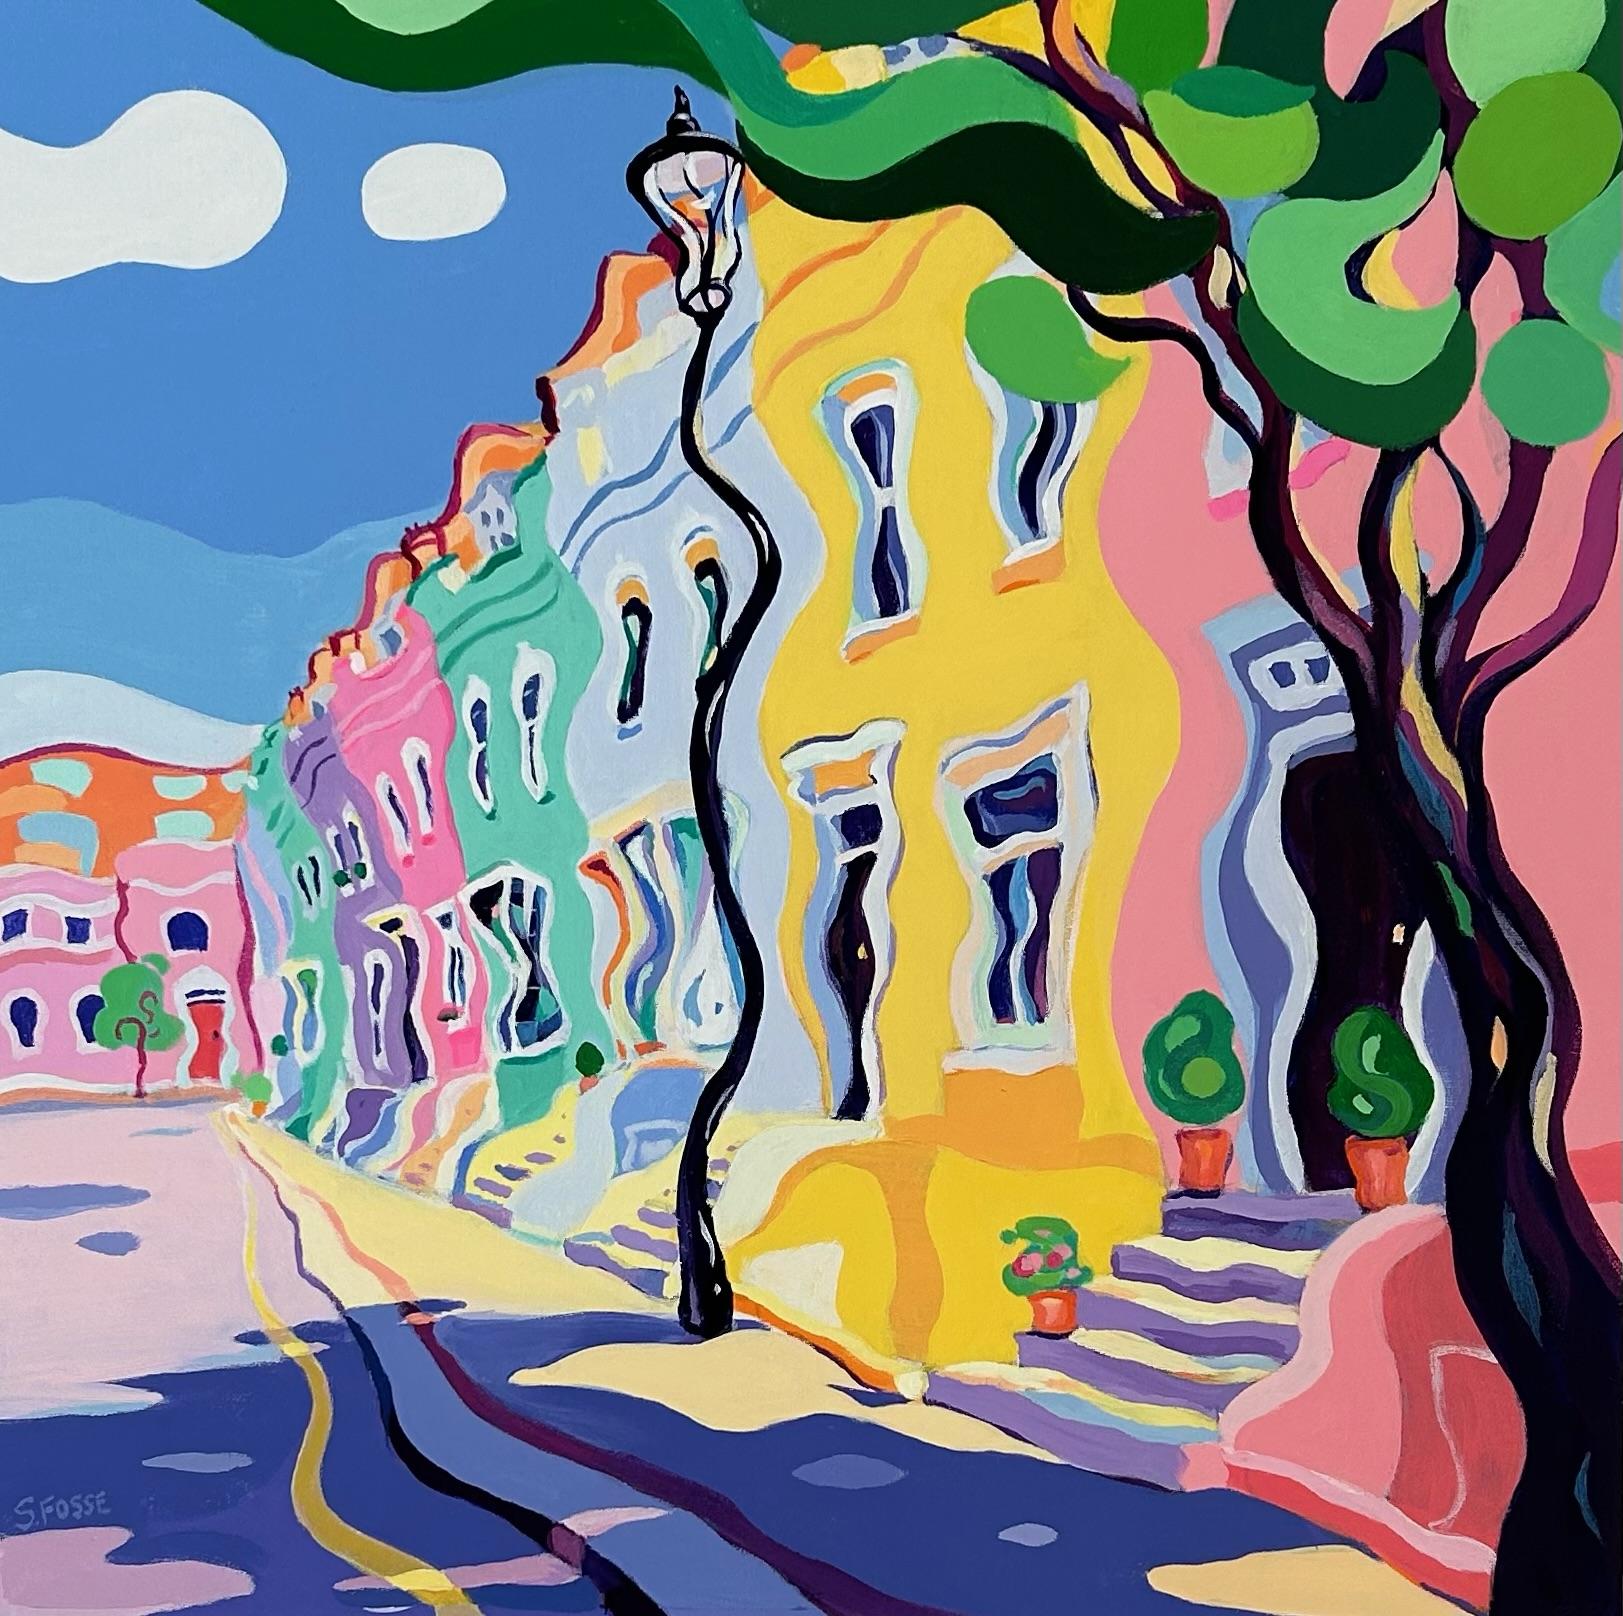 Chelsea in Spring-original surrealism-realism cityscape painting-contemporary  - Art by Sarah Fosse